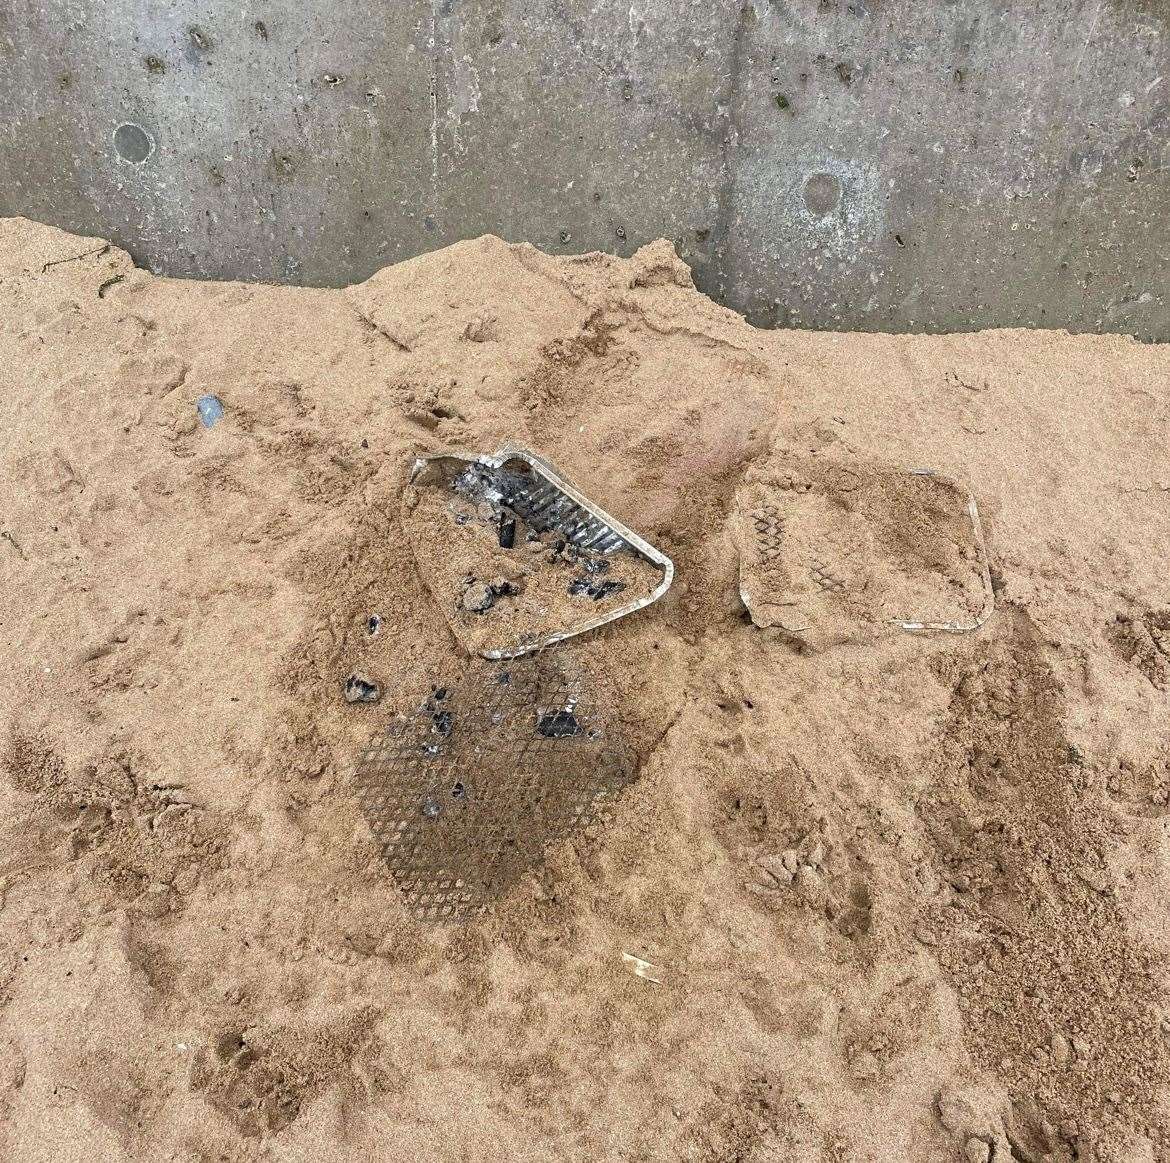 Thanet District Council says leaving disposable barbecues on the beach is "unforgivable". Picture: Caroline King